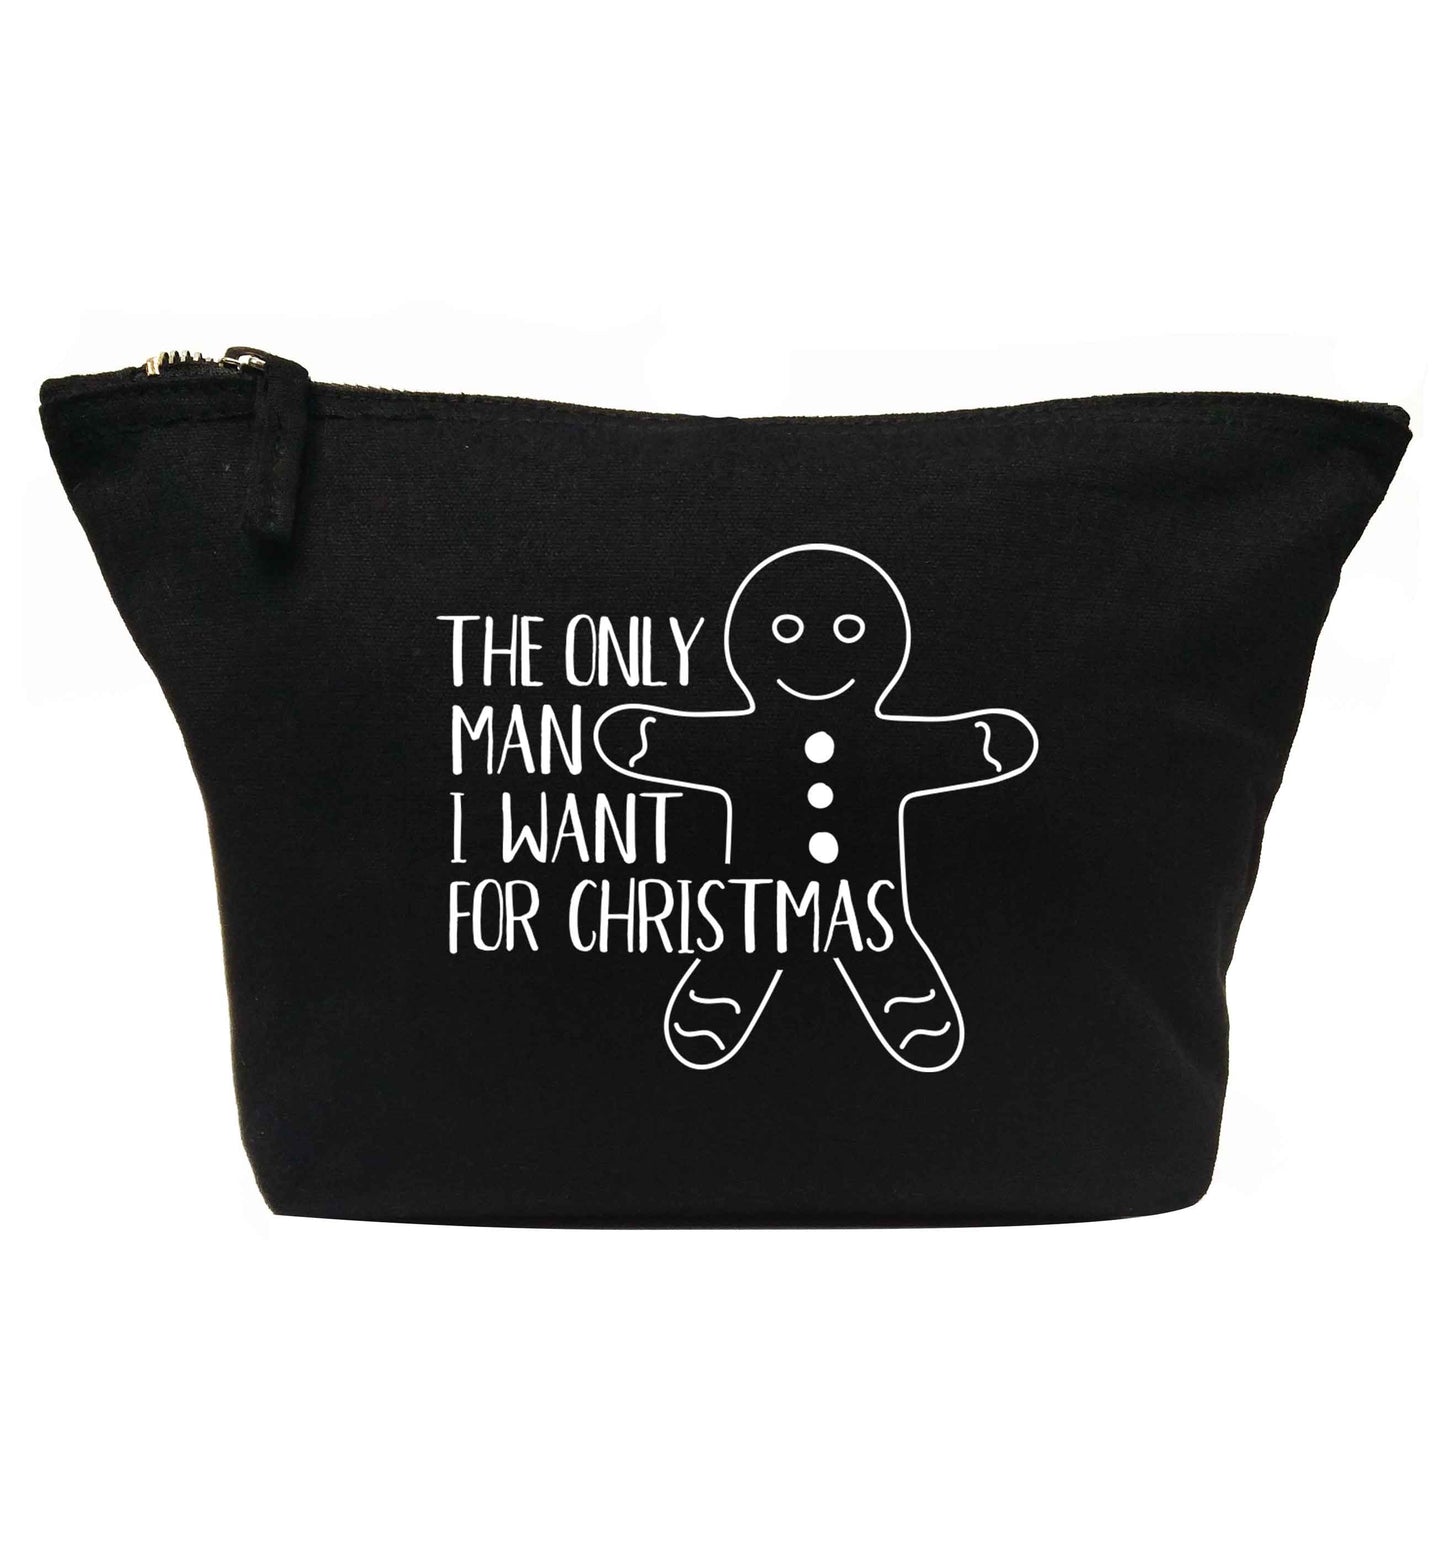 The only man I want for Christmas | makeup / wash bag